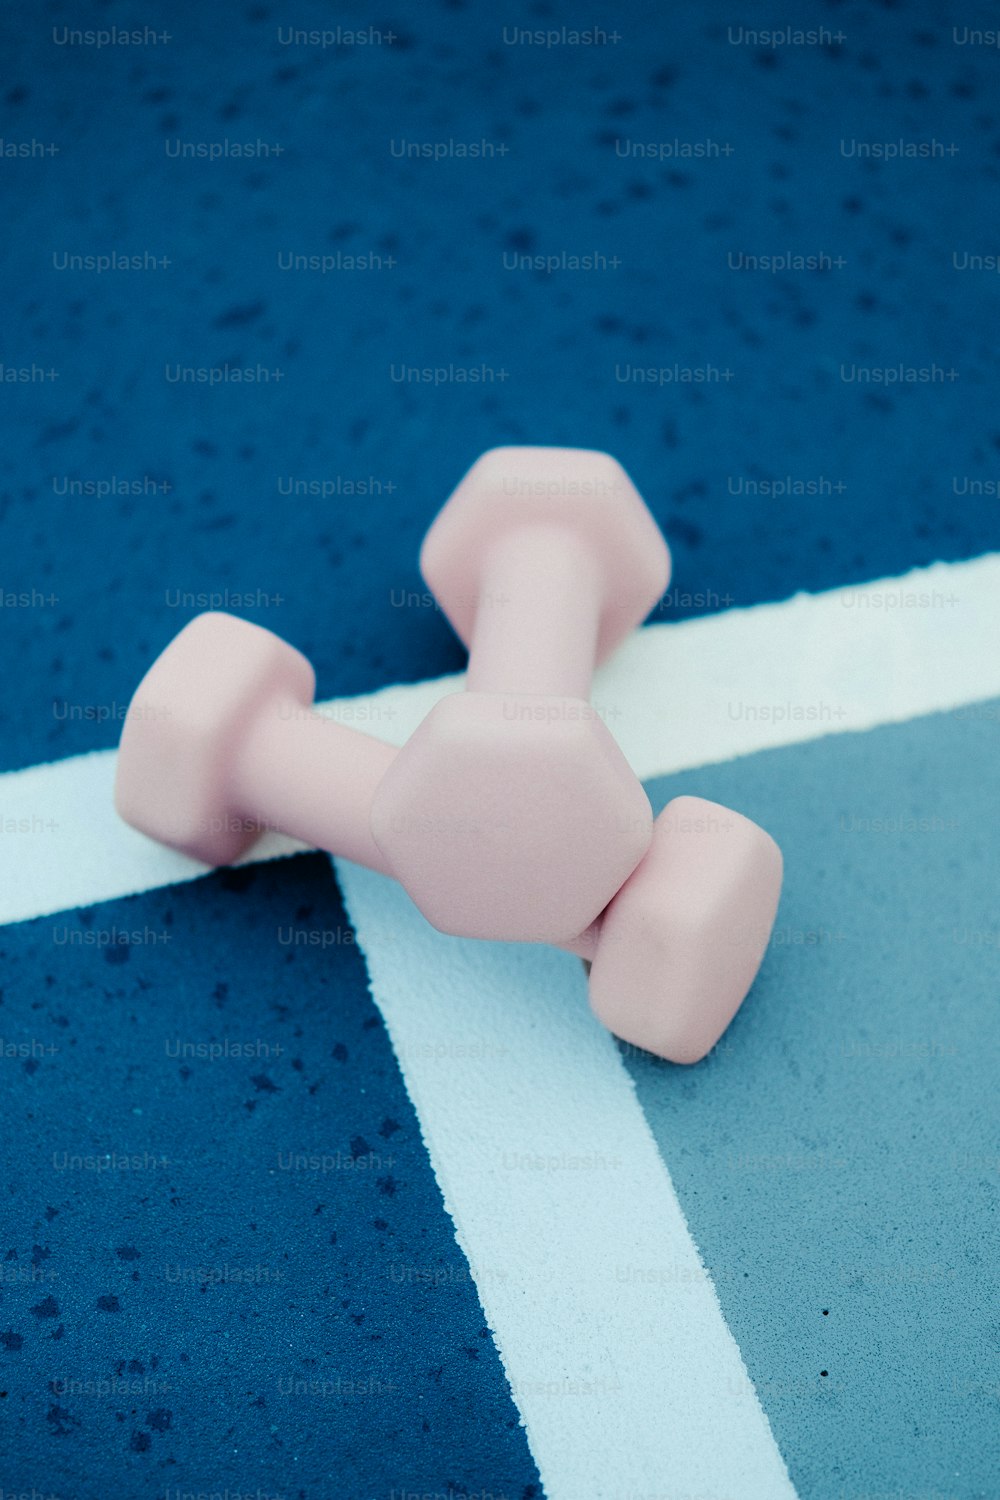 a pink object on a blue and white surface